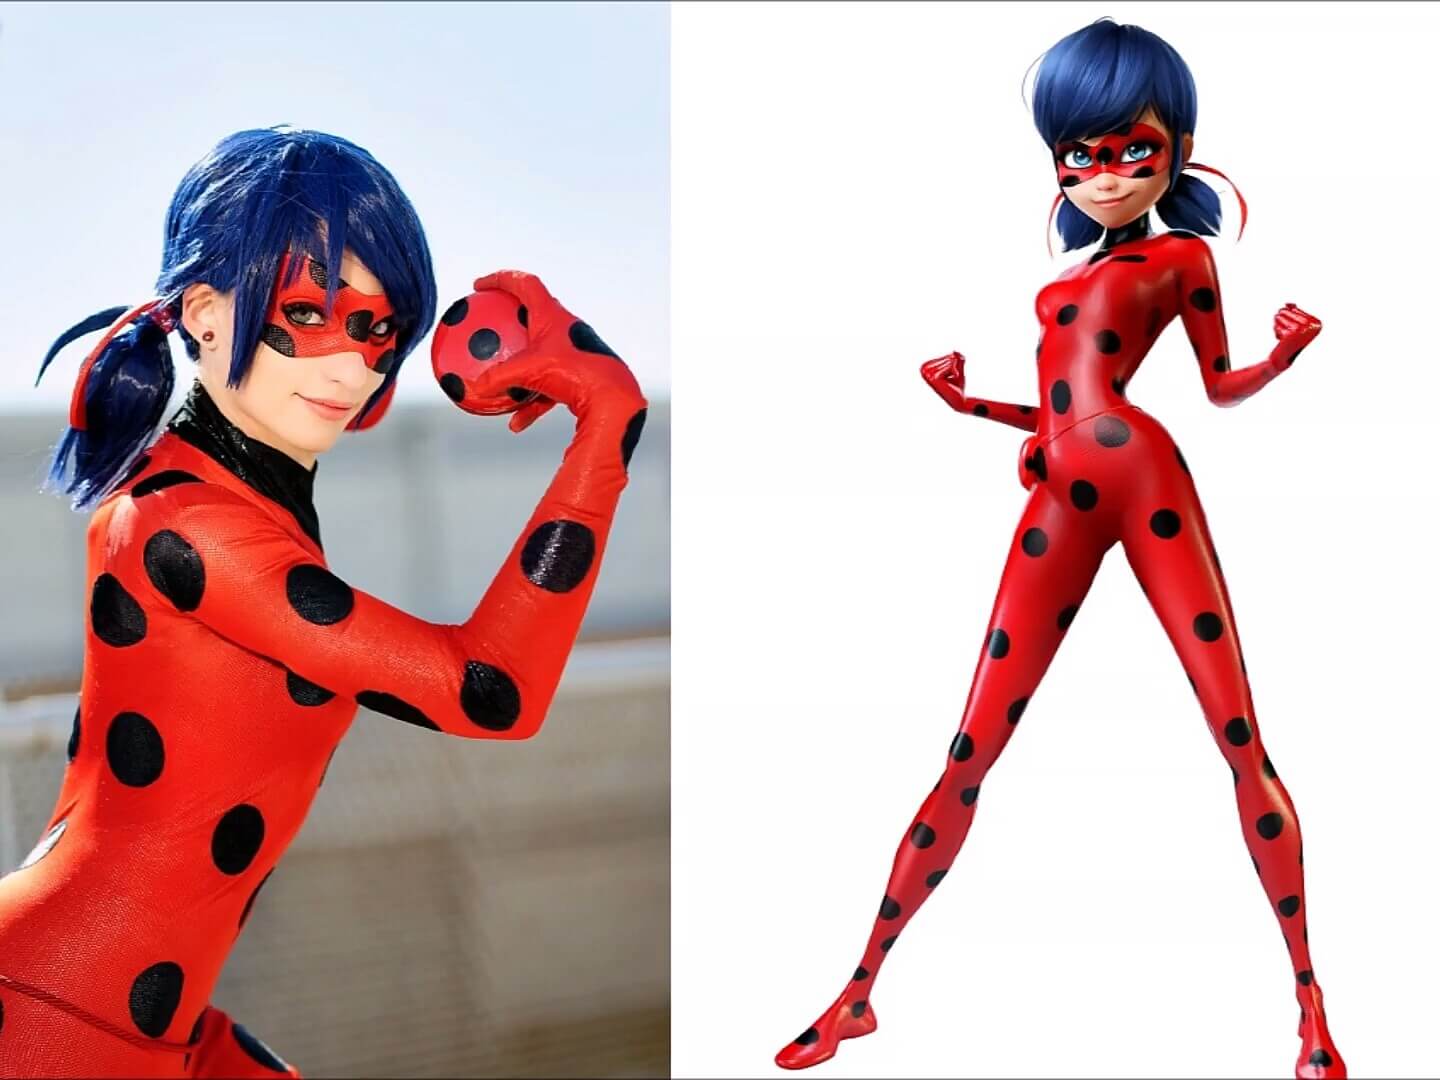 20 Amazing Cosplays That Look Extremely Similar To The Original Cartoons - Mysterious Ladybug!